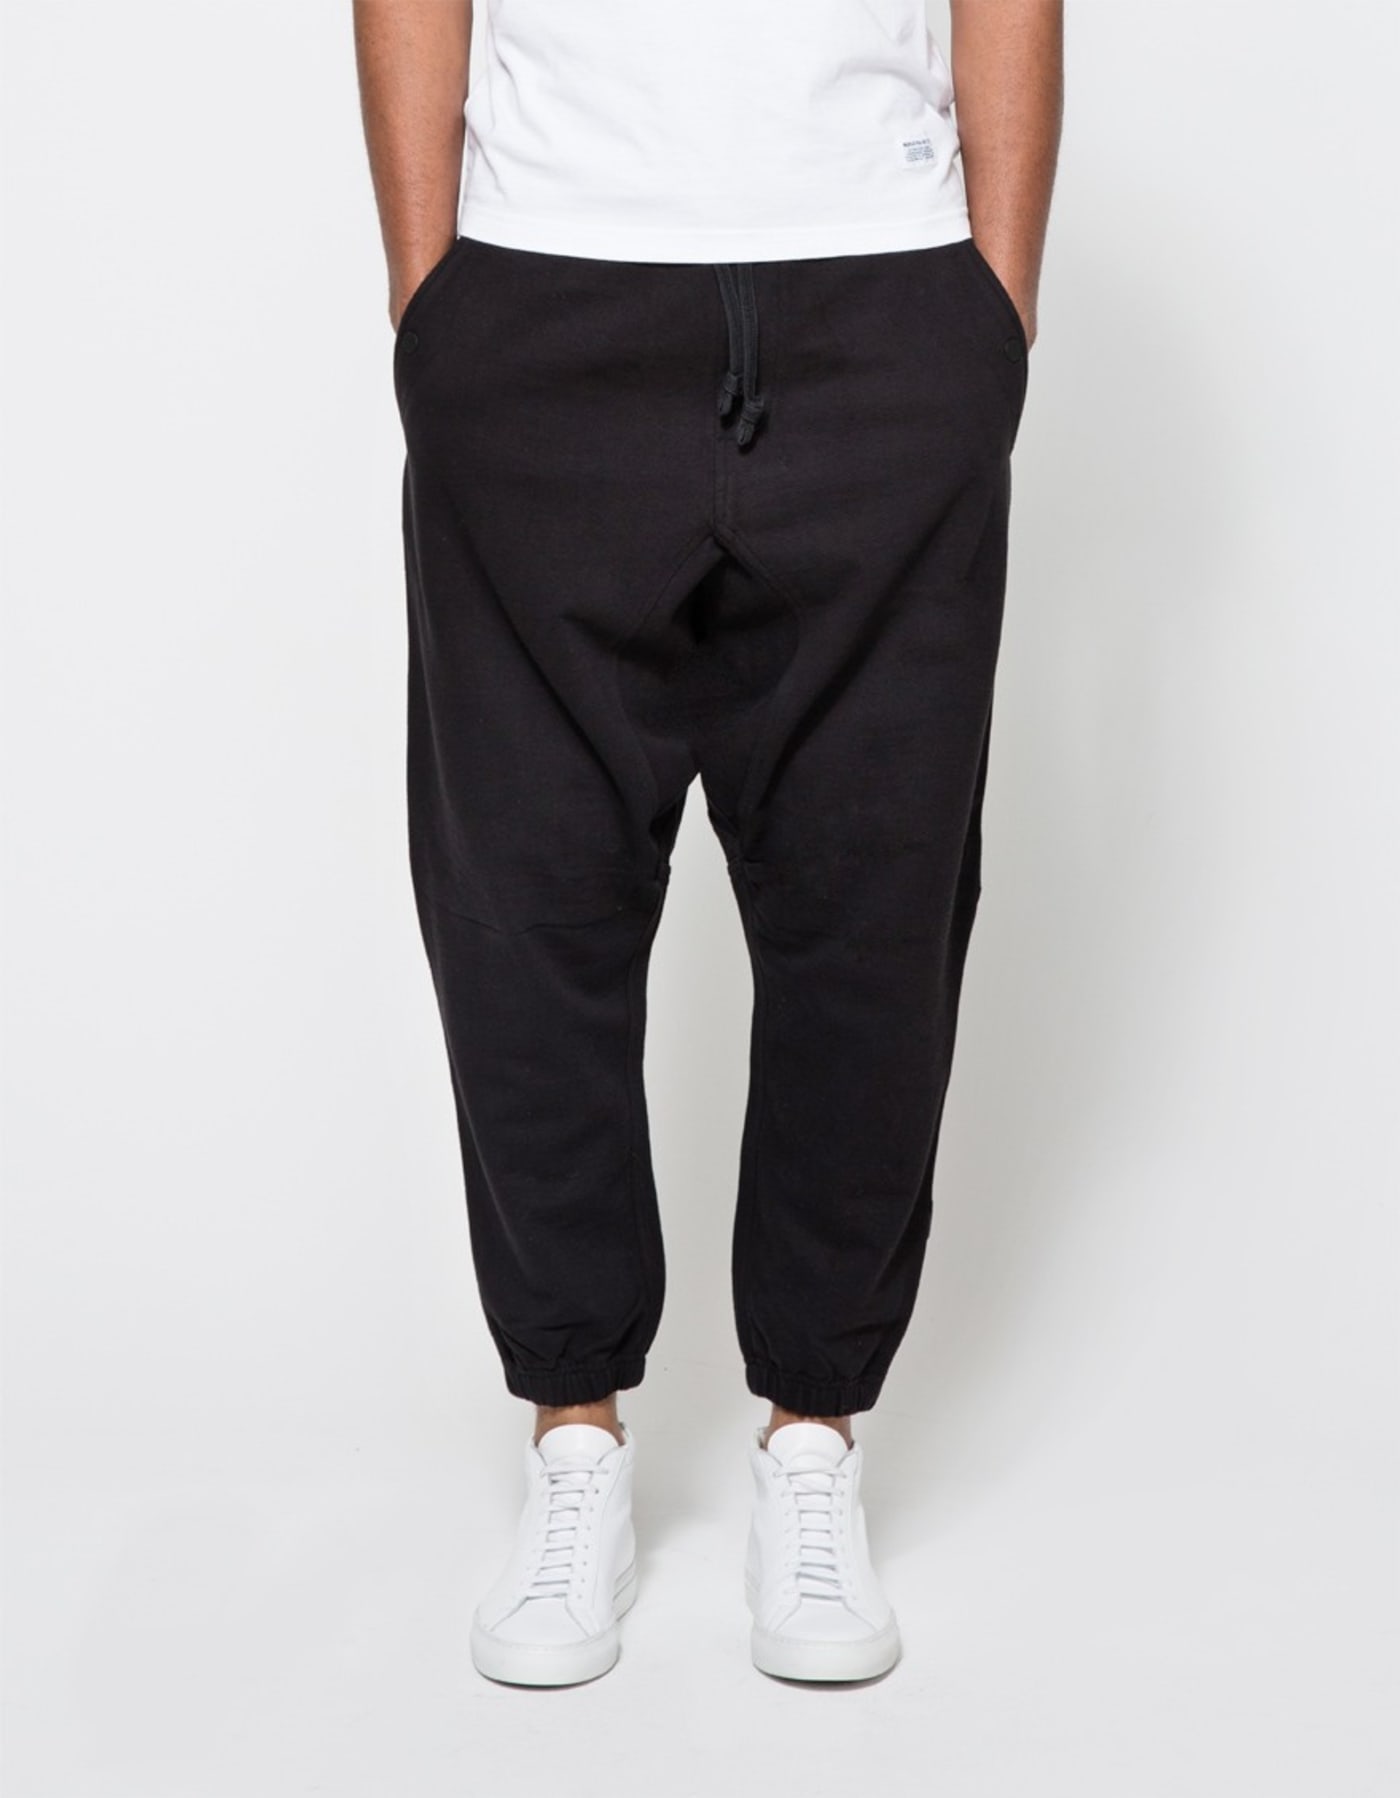 Your Mom’s Spaghetti Will Never Fall Out Of These Maharishi Sweatpants ...